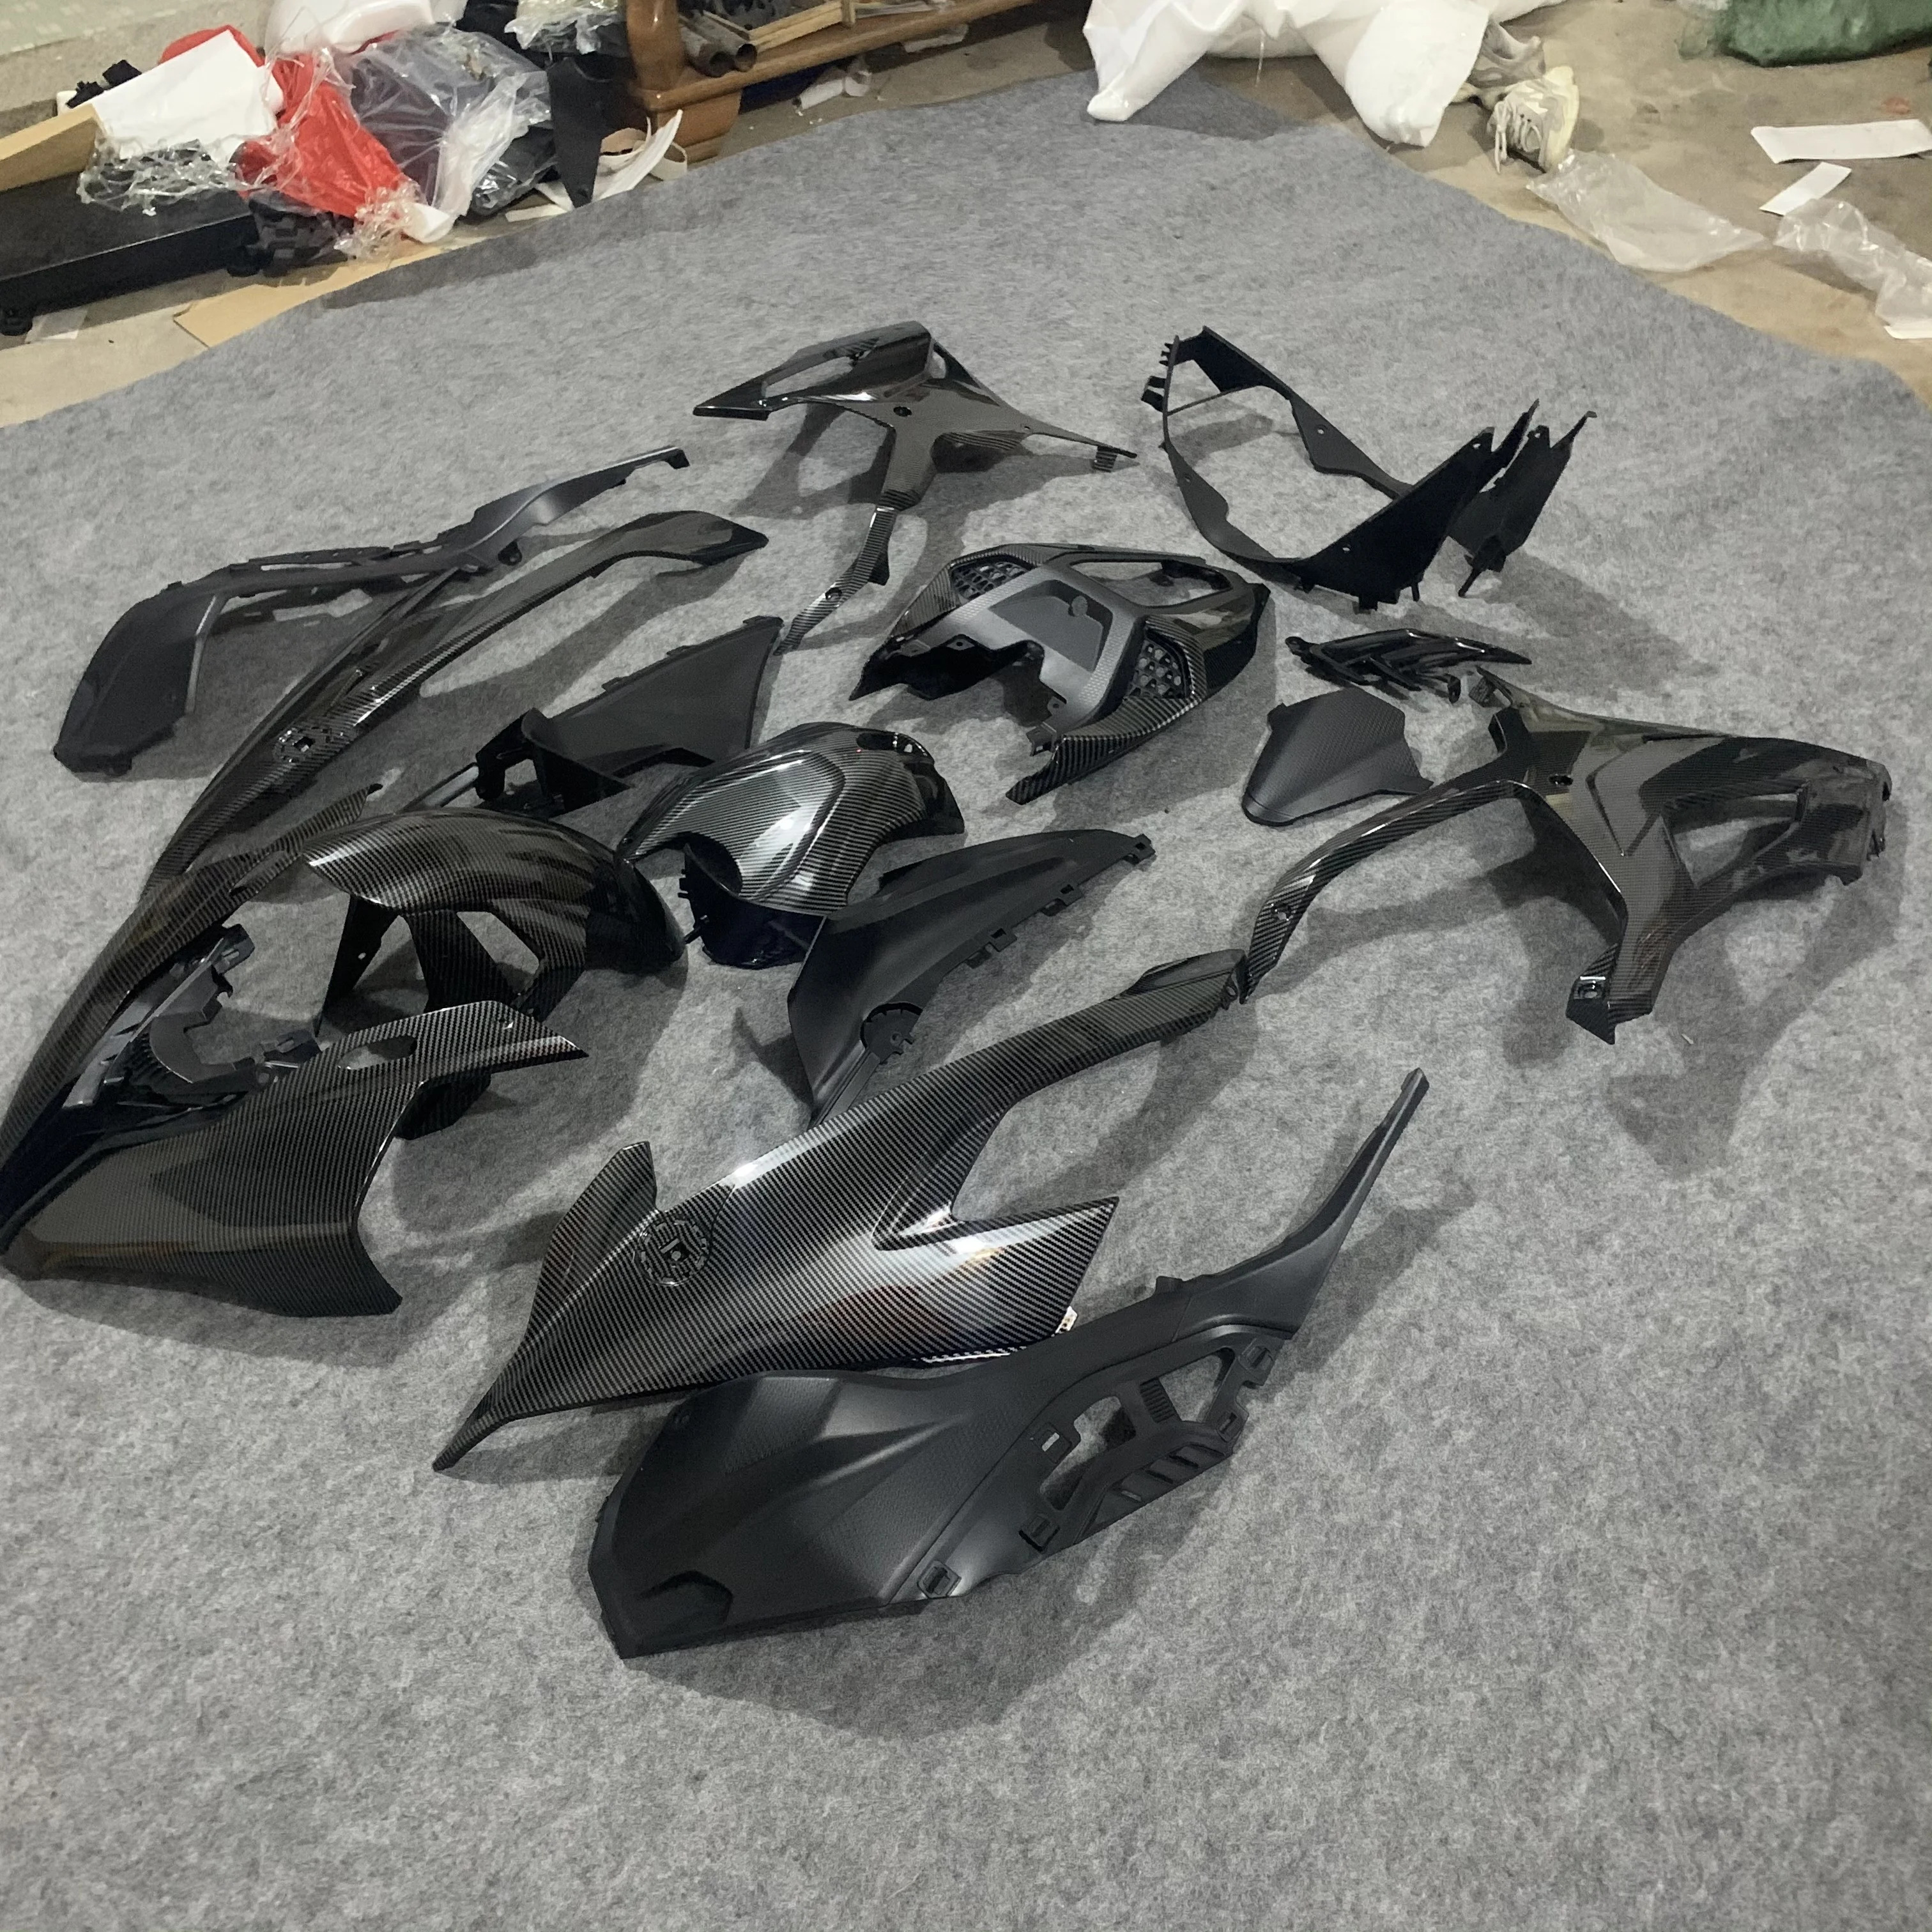 

2020 WHSC ABS Injection Painted Carbon Fiber Motorcycle Body Kit For BMW S1000RR 2019-2020 Motorcycle Fairing Cover Custom Kits, Pictures shown